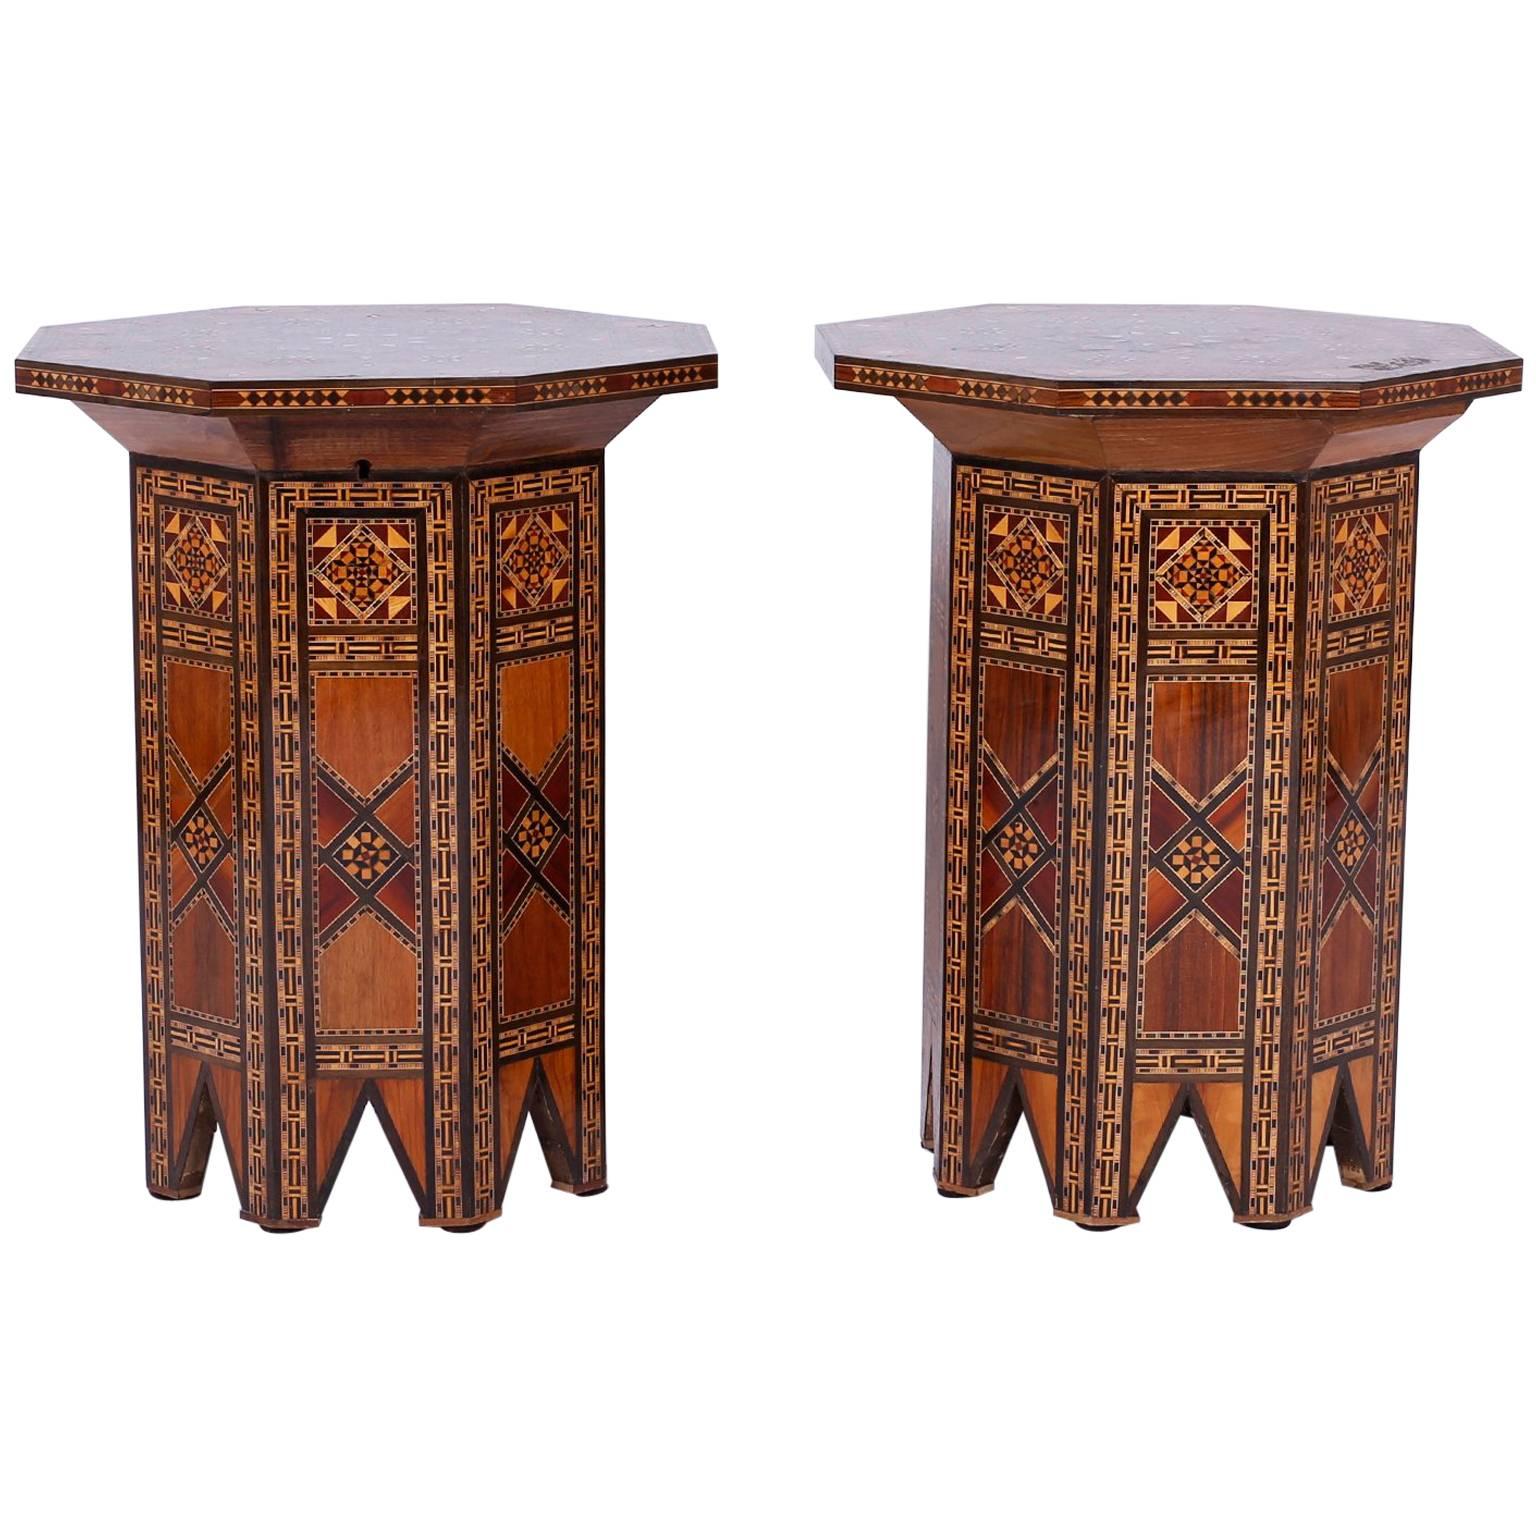 Exotic Pair of Syrian Mother-of-Pearl Inlaid Tables or Stands